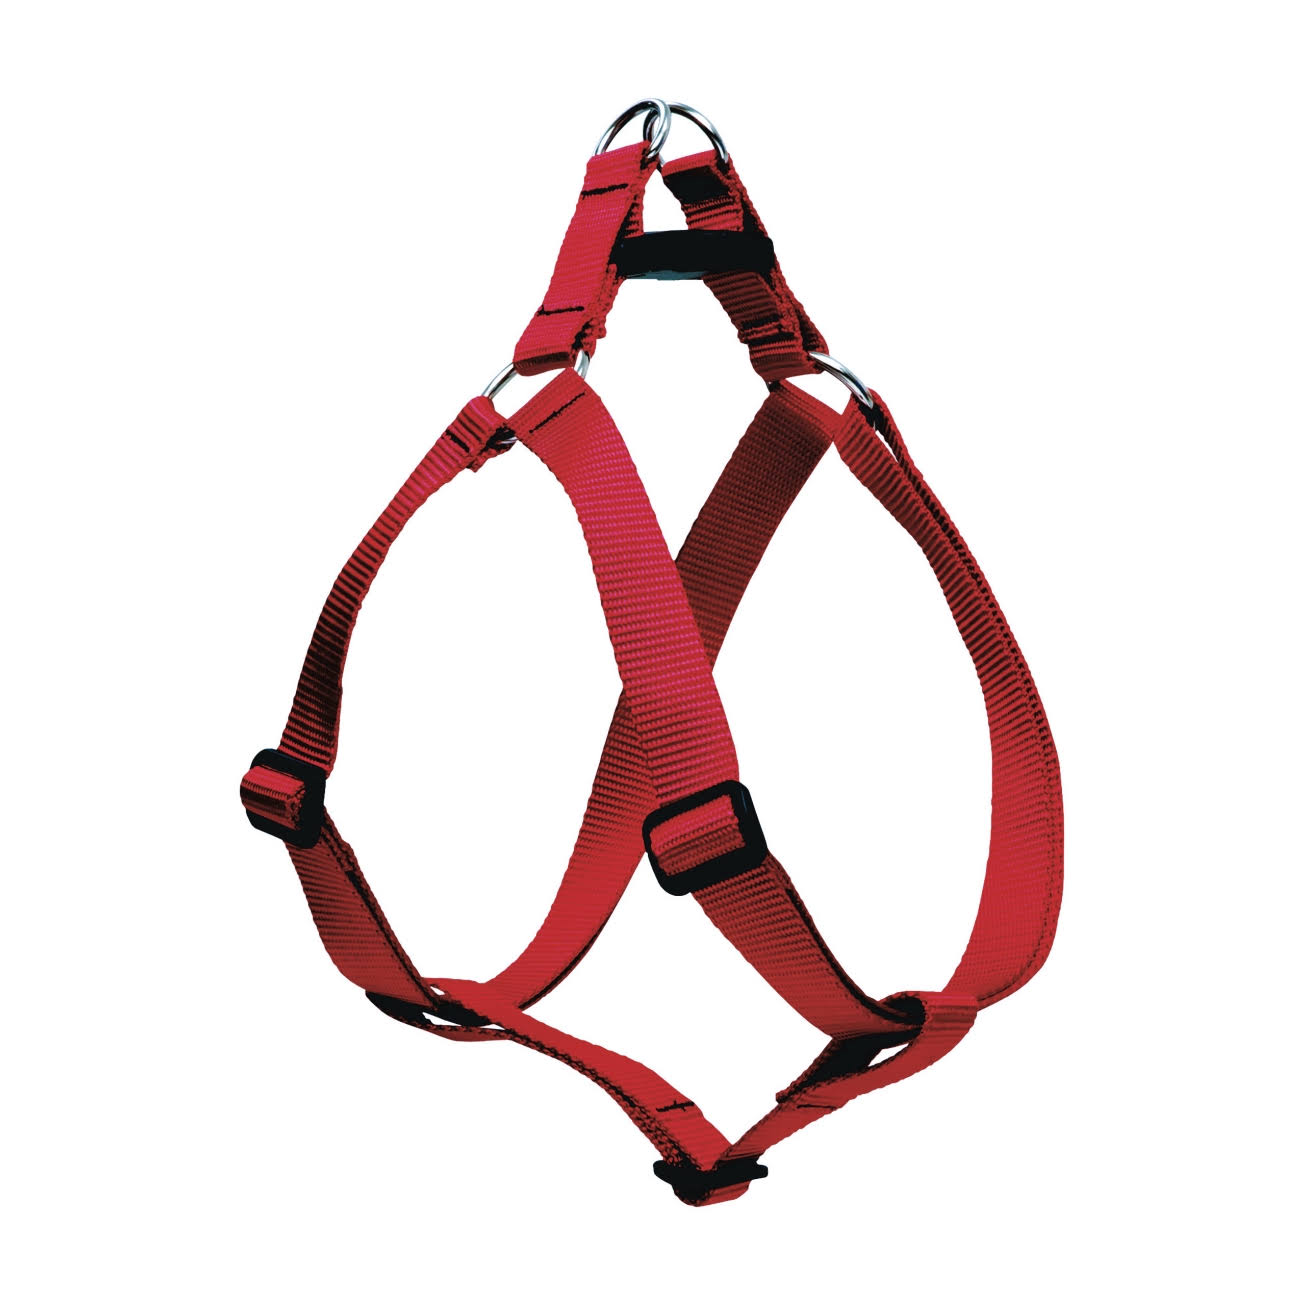 Lupine Step In Dog Harness - Red, 3/4" x 20-30"